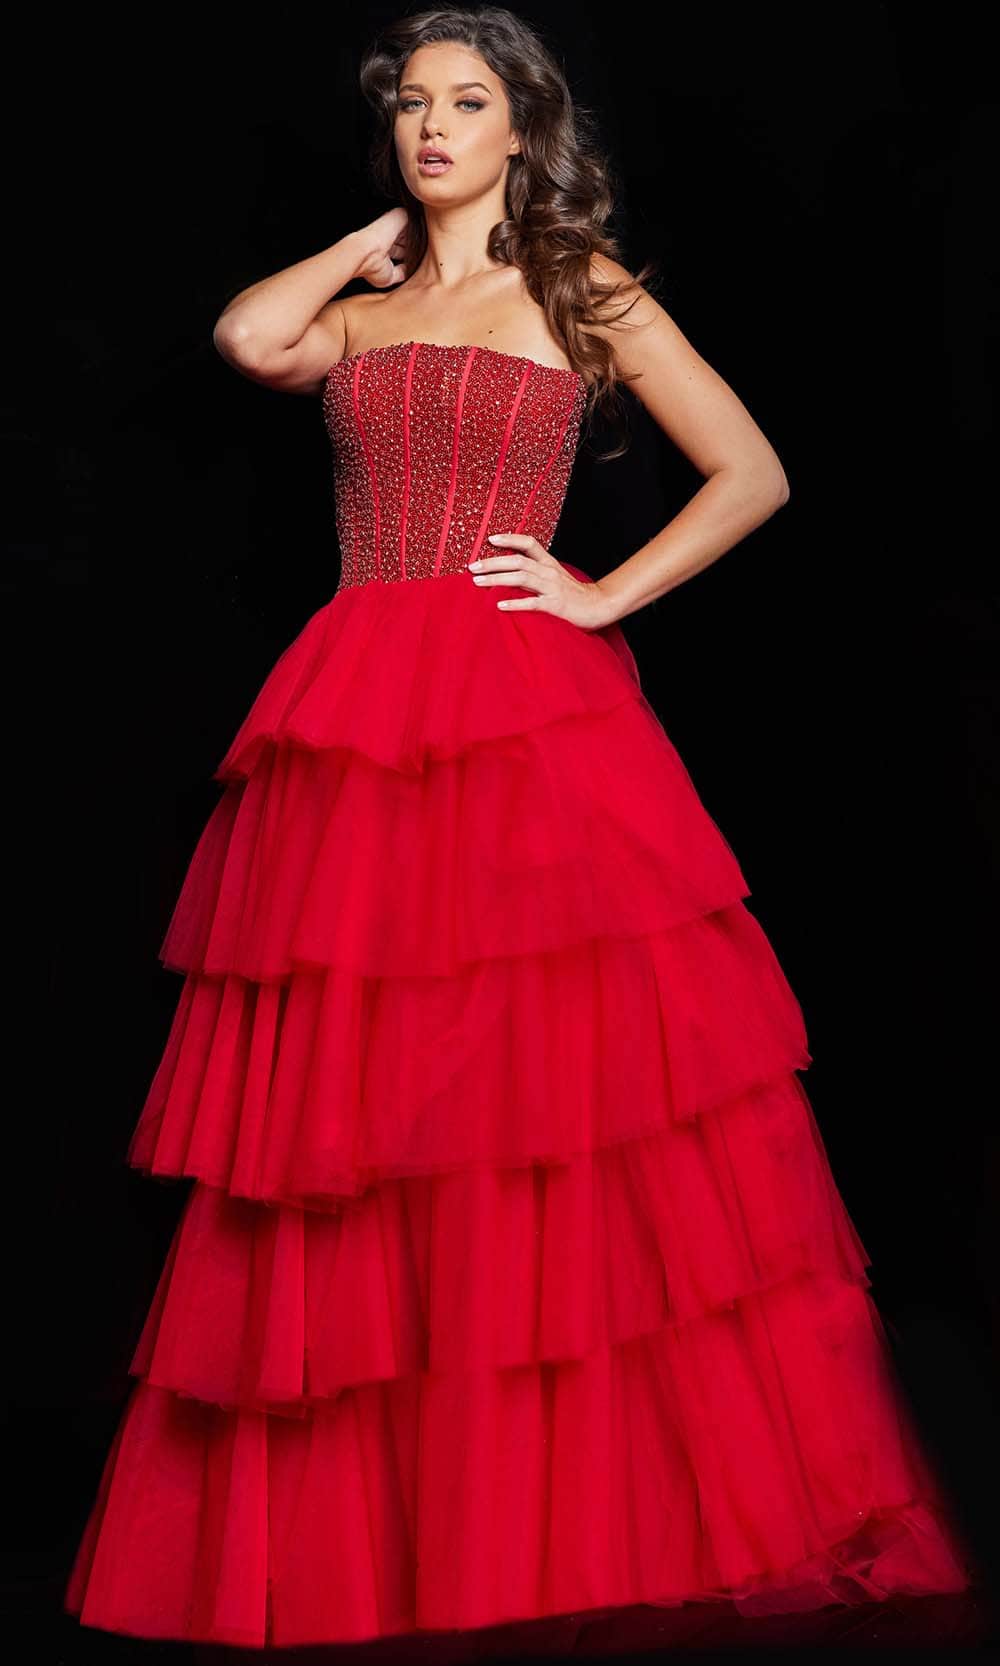 Jovani 37210 - Beaded Strapless Tiered Ballgown Special Occasion Dress 00 / Red